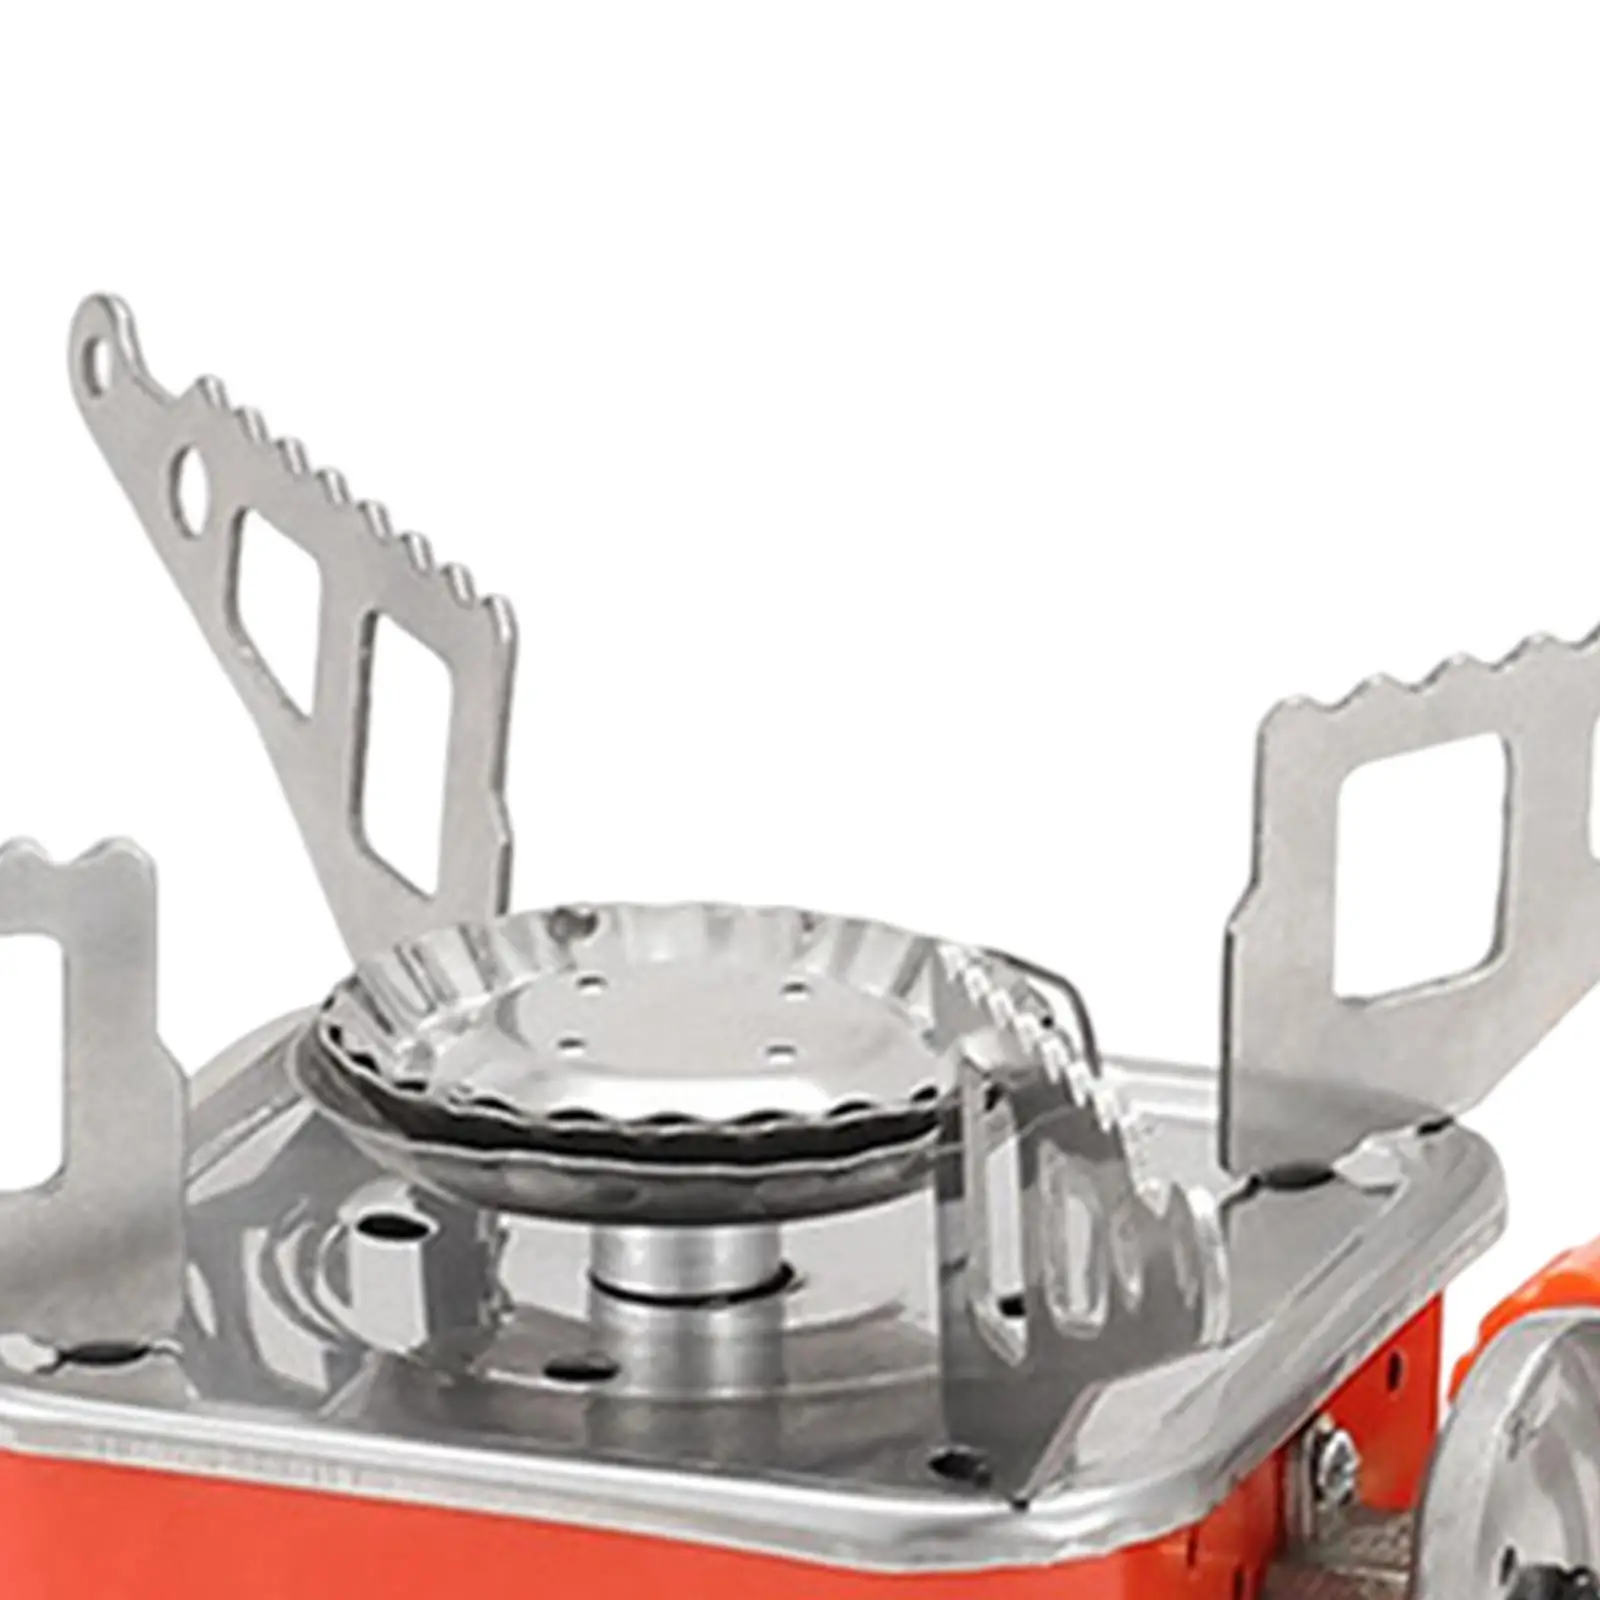 Camping Gas Stove with Piezo Ignition, Mini Cooking Cooker Gear Stove Burner